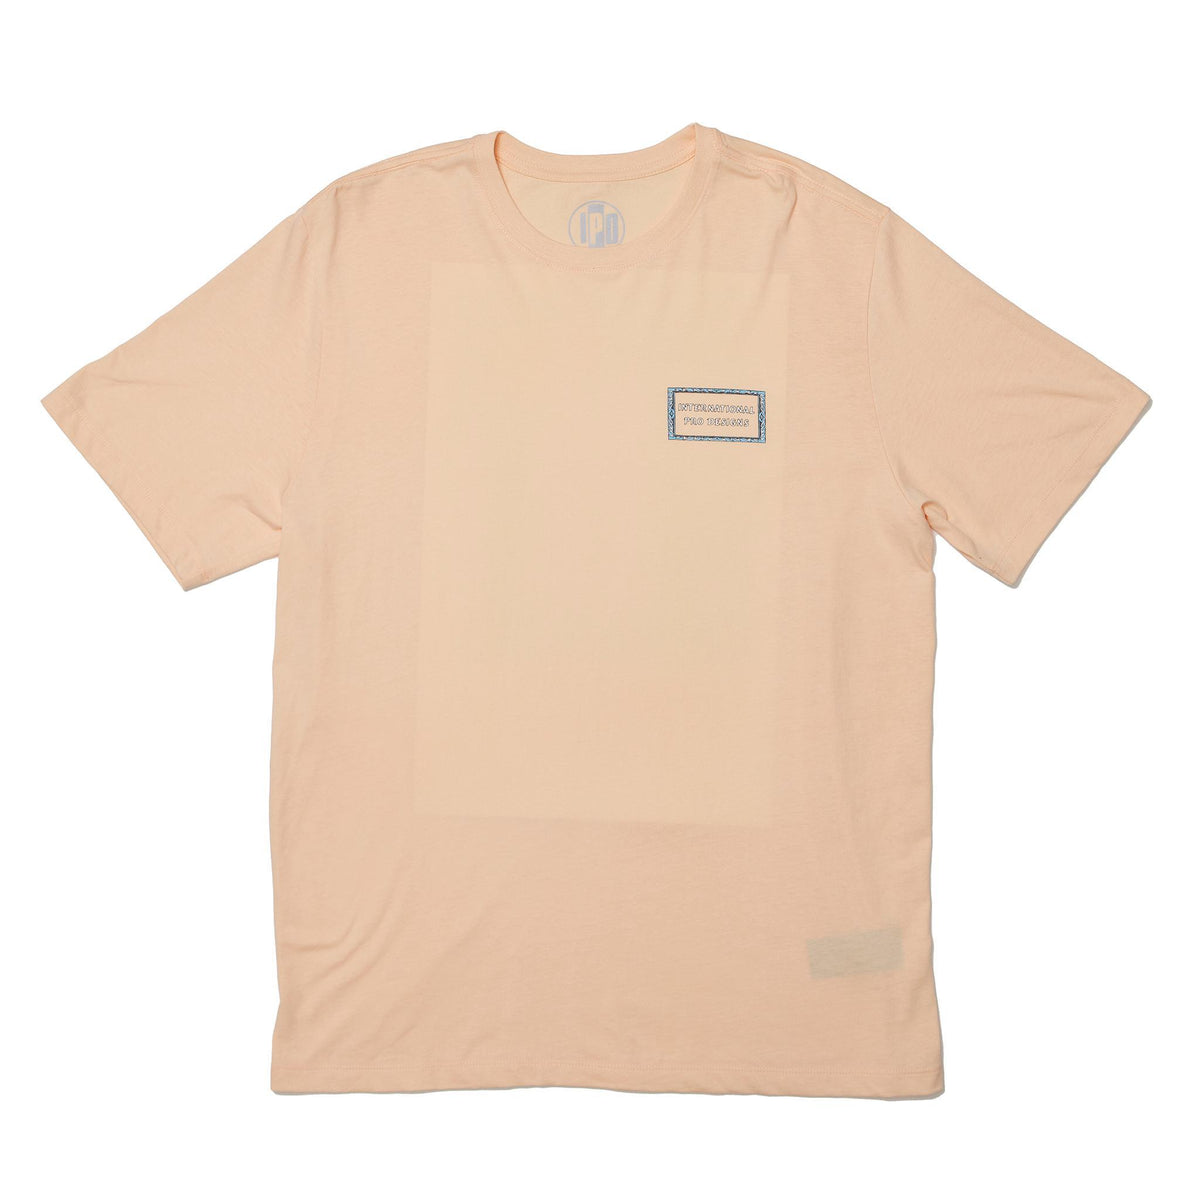 front view of the mens framed super soft s/s tee in color sherbert showing the small frint logos saying international pro designs on the left chest